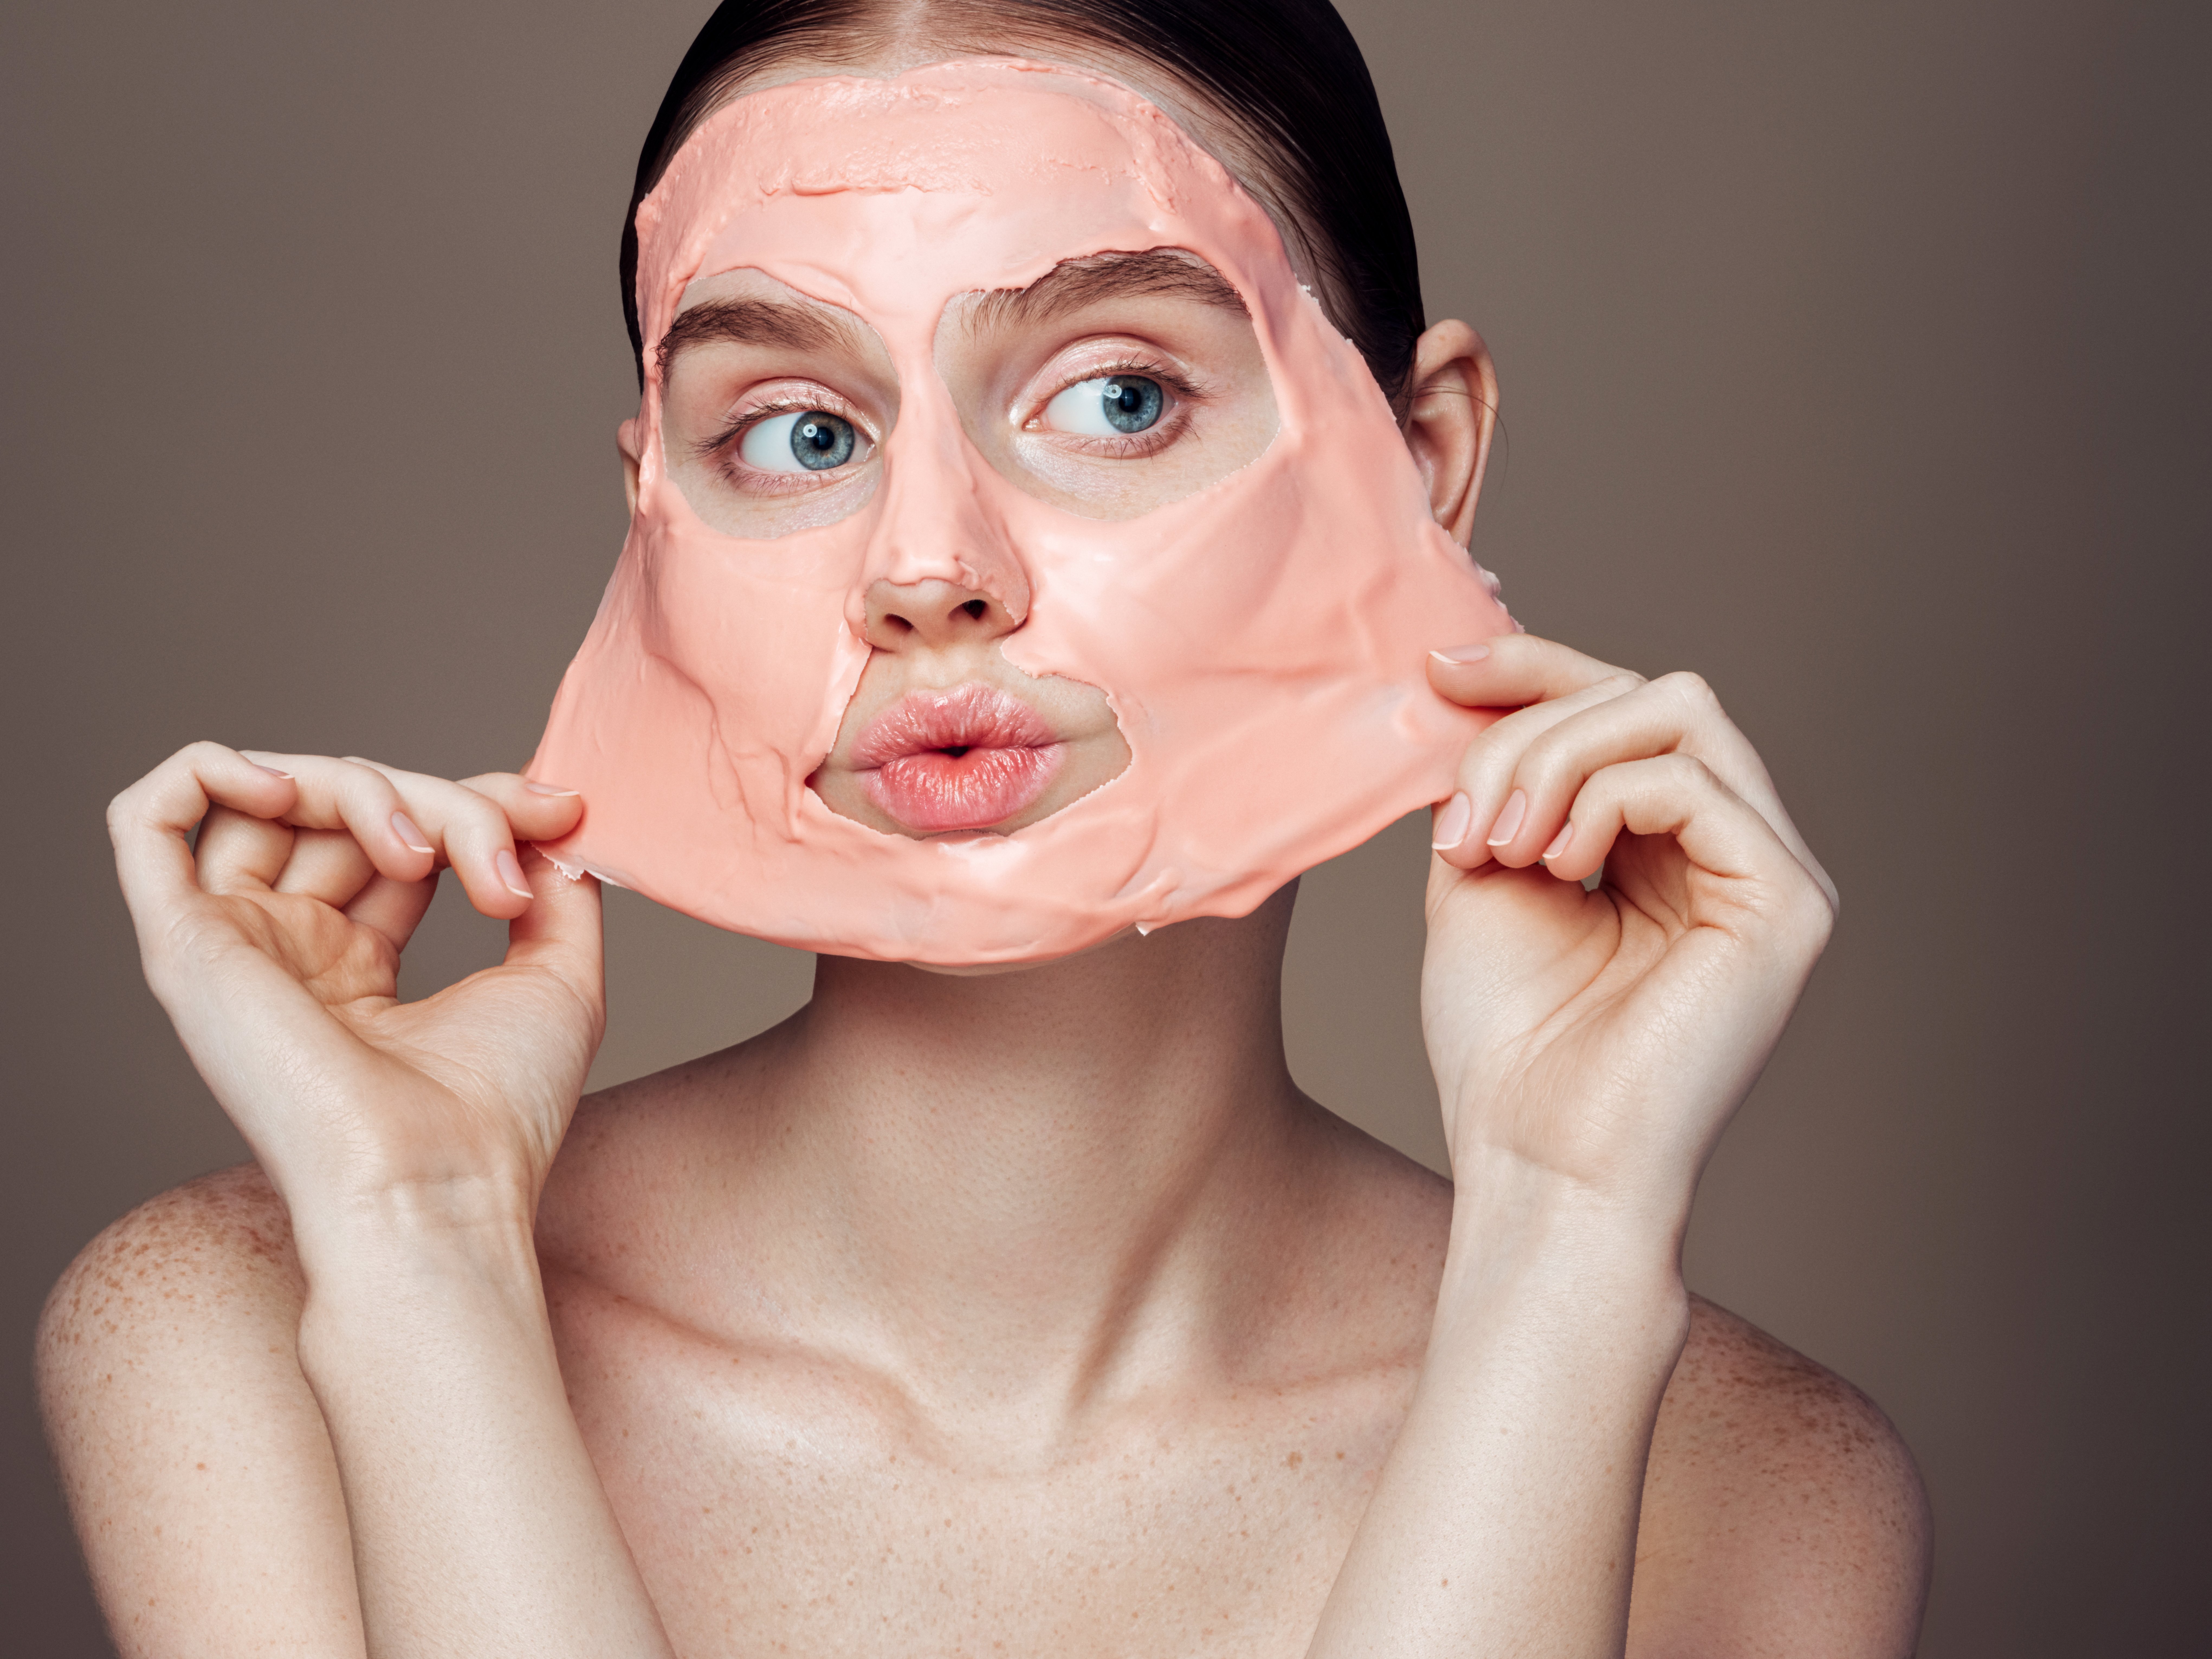 Woman removing facial mask | Source: Getty Images